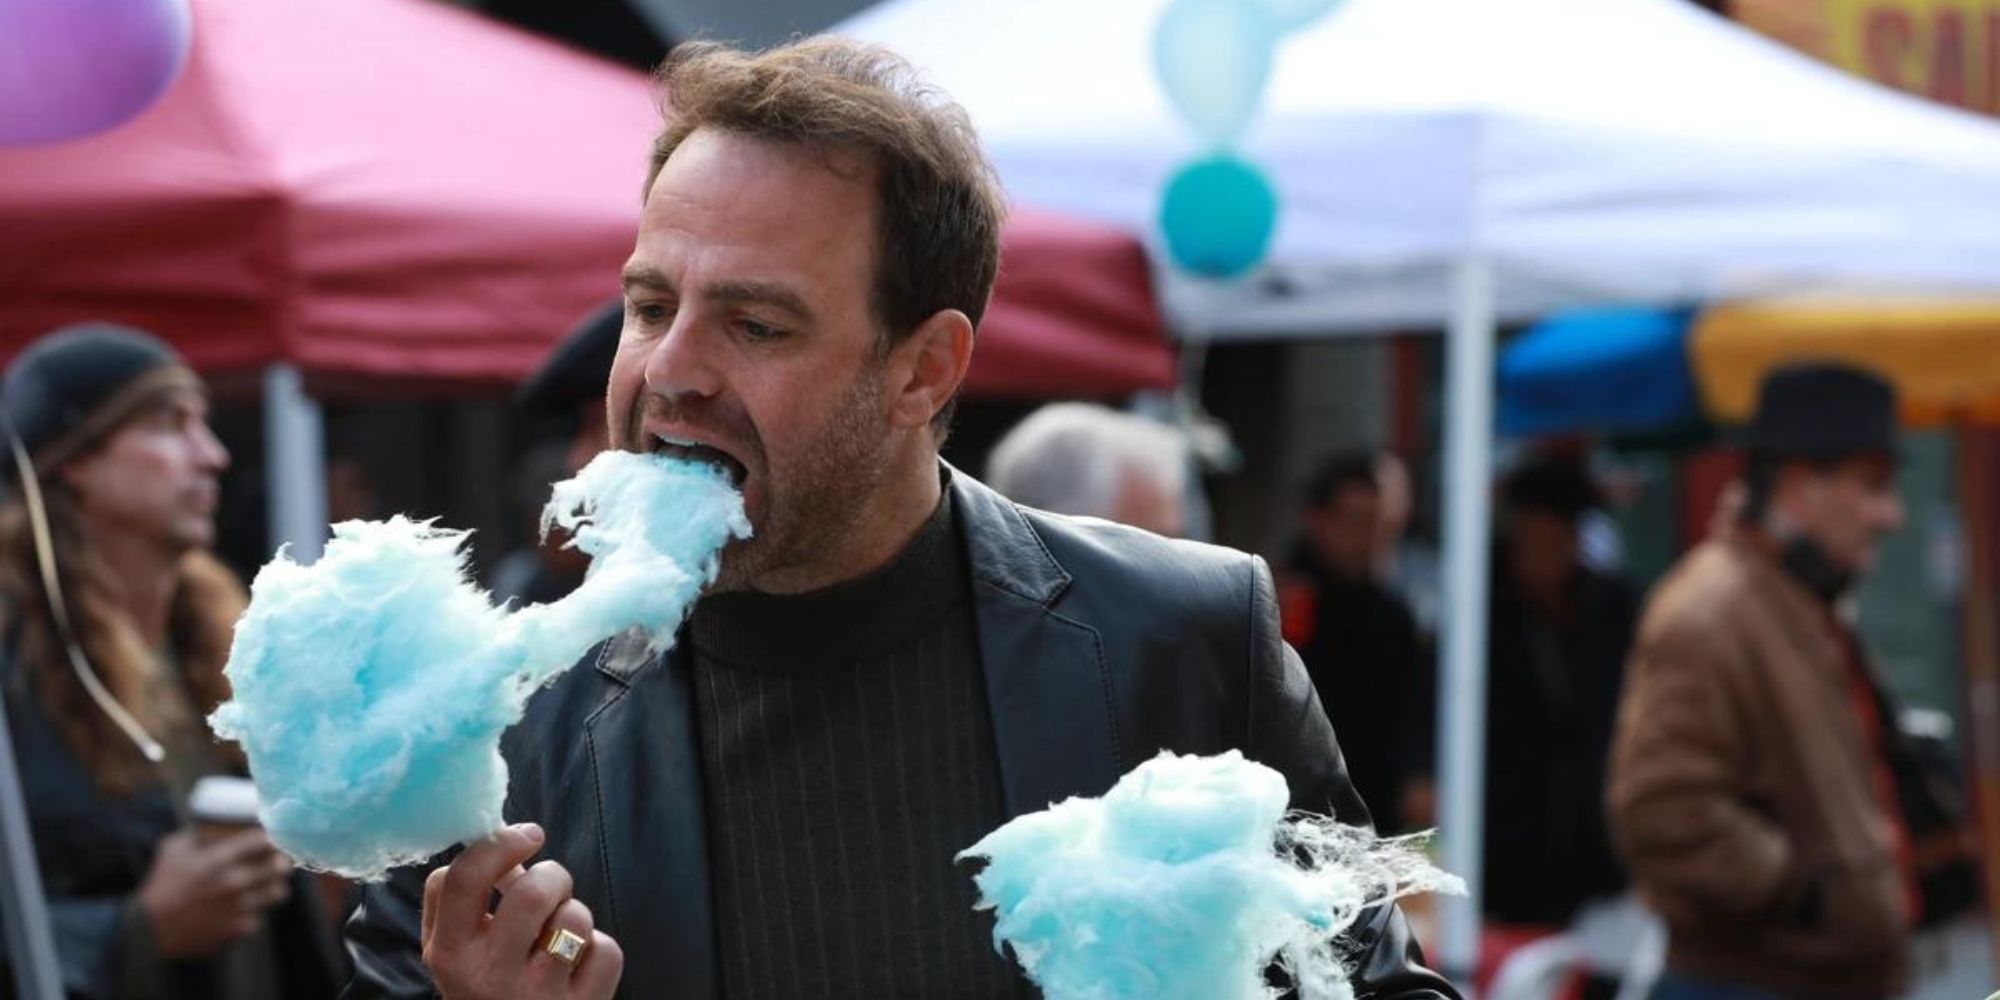 Seamus Murphy from Brooklyn Nine-Nine eating cotton candy